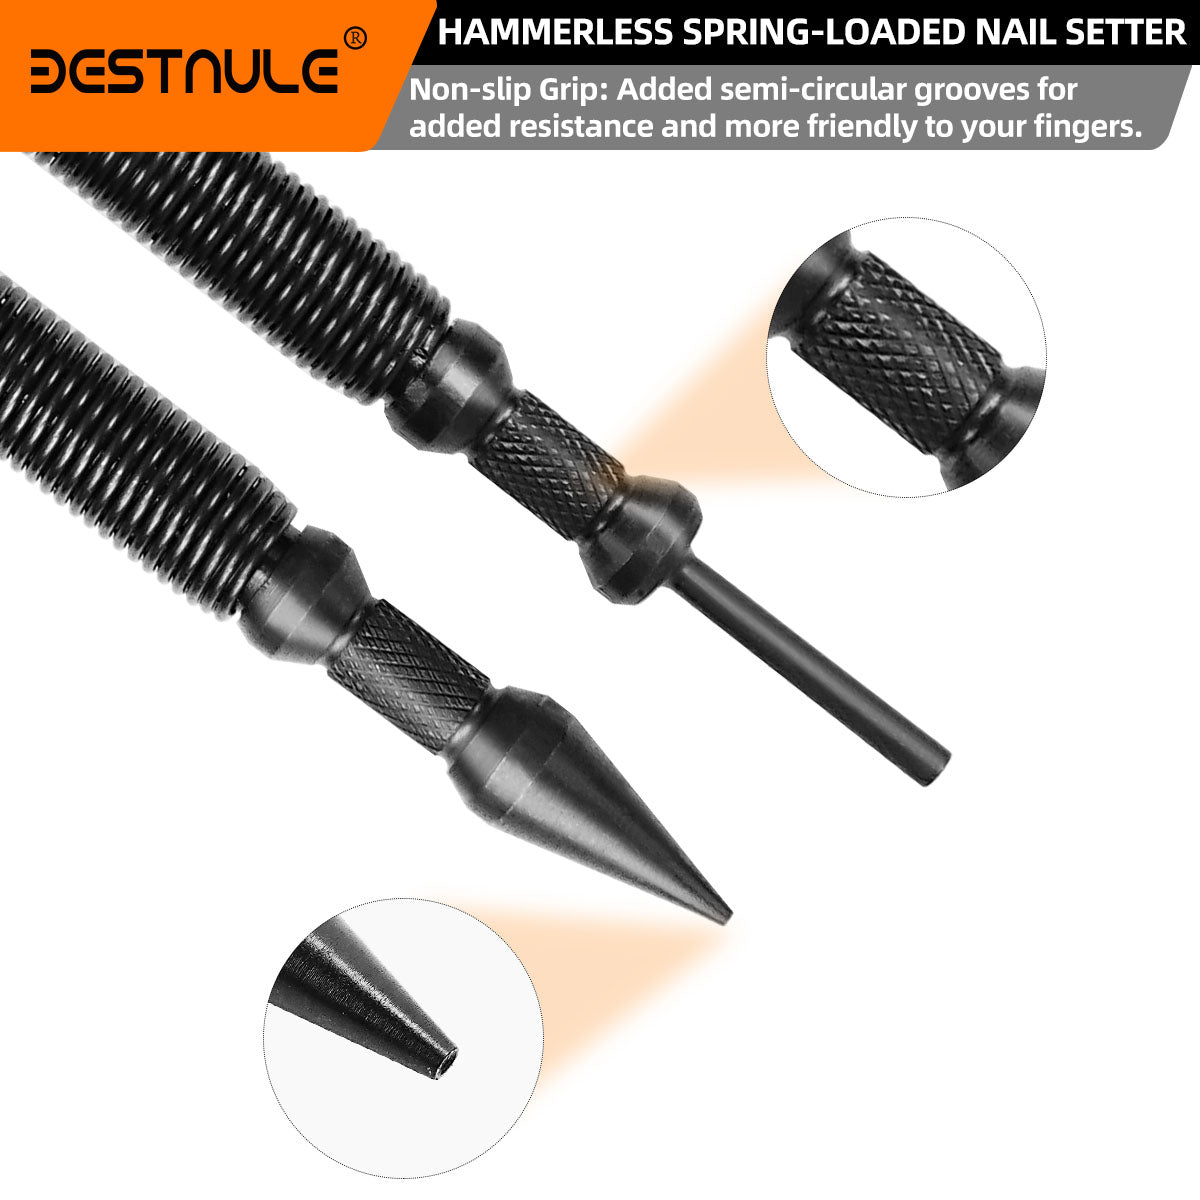 BESTNULE 2-Piece Nail Setter Dual Head Nail Set, Dual Head Nail Setter & Hinge Pin Remover Punch Set, Nail Setter Features 1/32-in, 1/16-in, 1/8-in